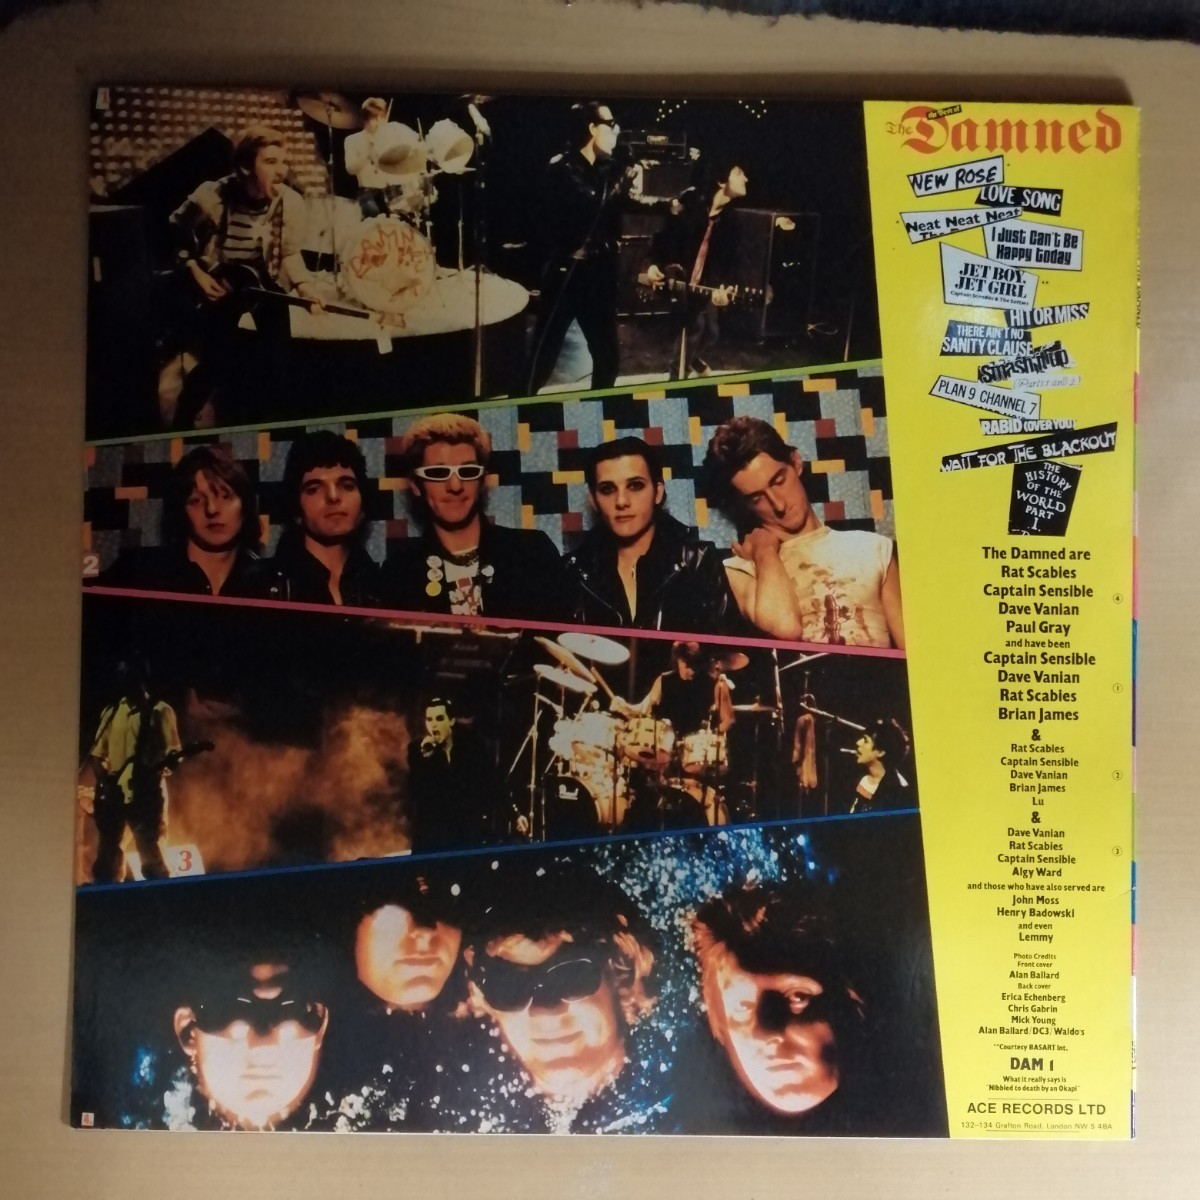 D02 中古LP 中古レコード ダムド ベスト THE DAMED another great record from the damned DAM1 UK盤の画像2